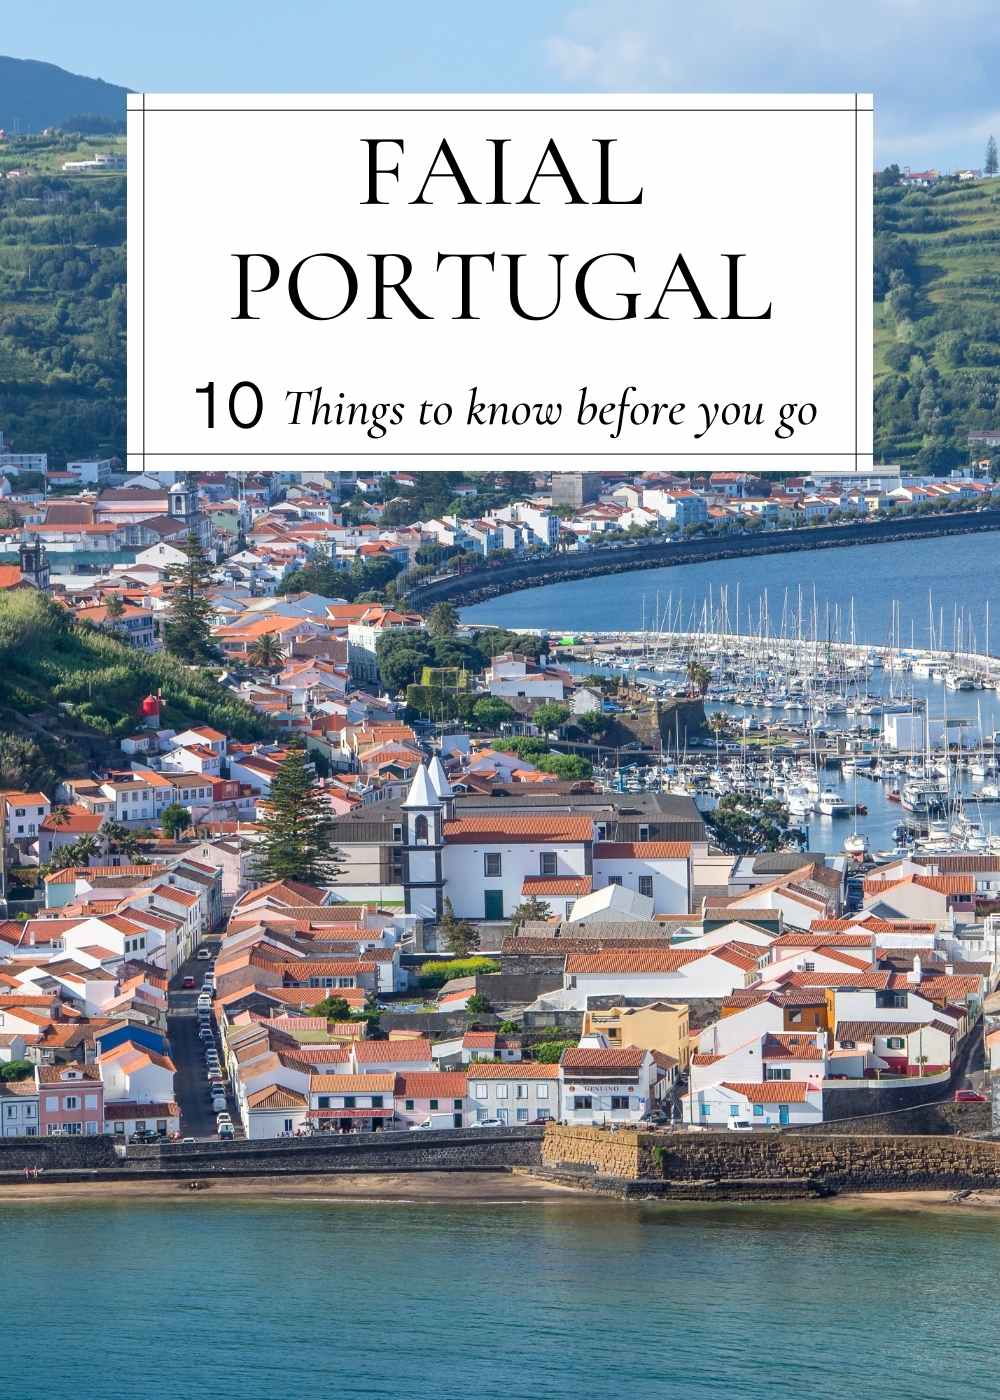 Faial Portugal helpful things to know before you go where to stay and what to do must see places and transport